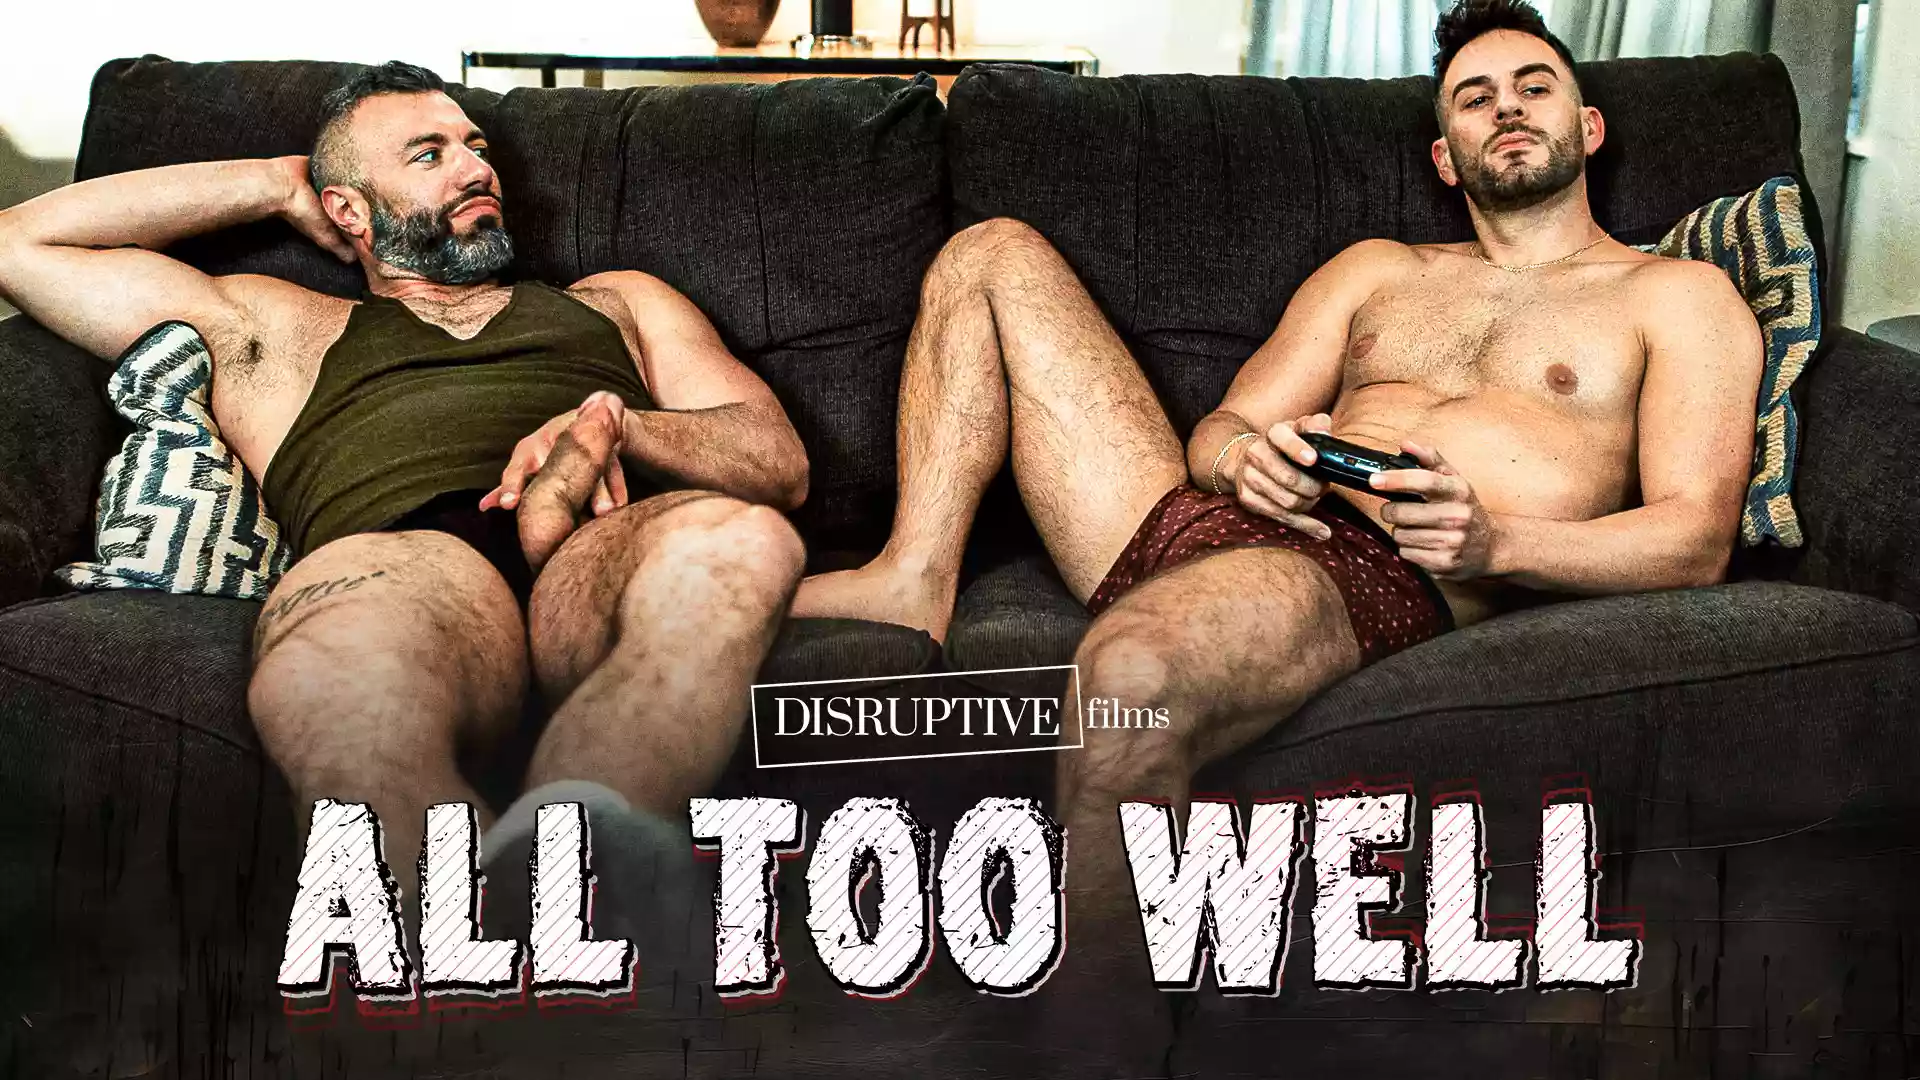 All Too Well – Cole Connor and Liam Hunt